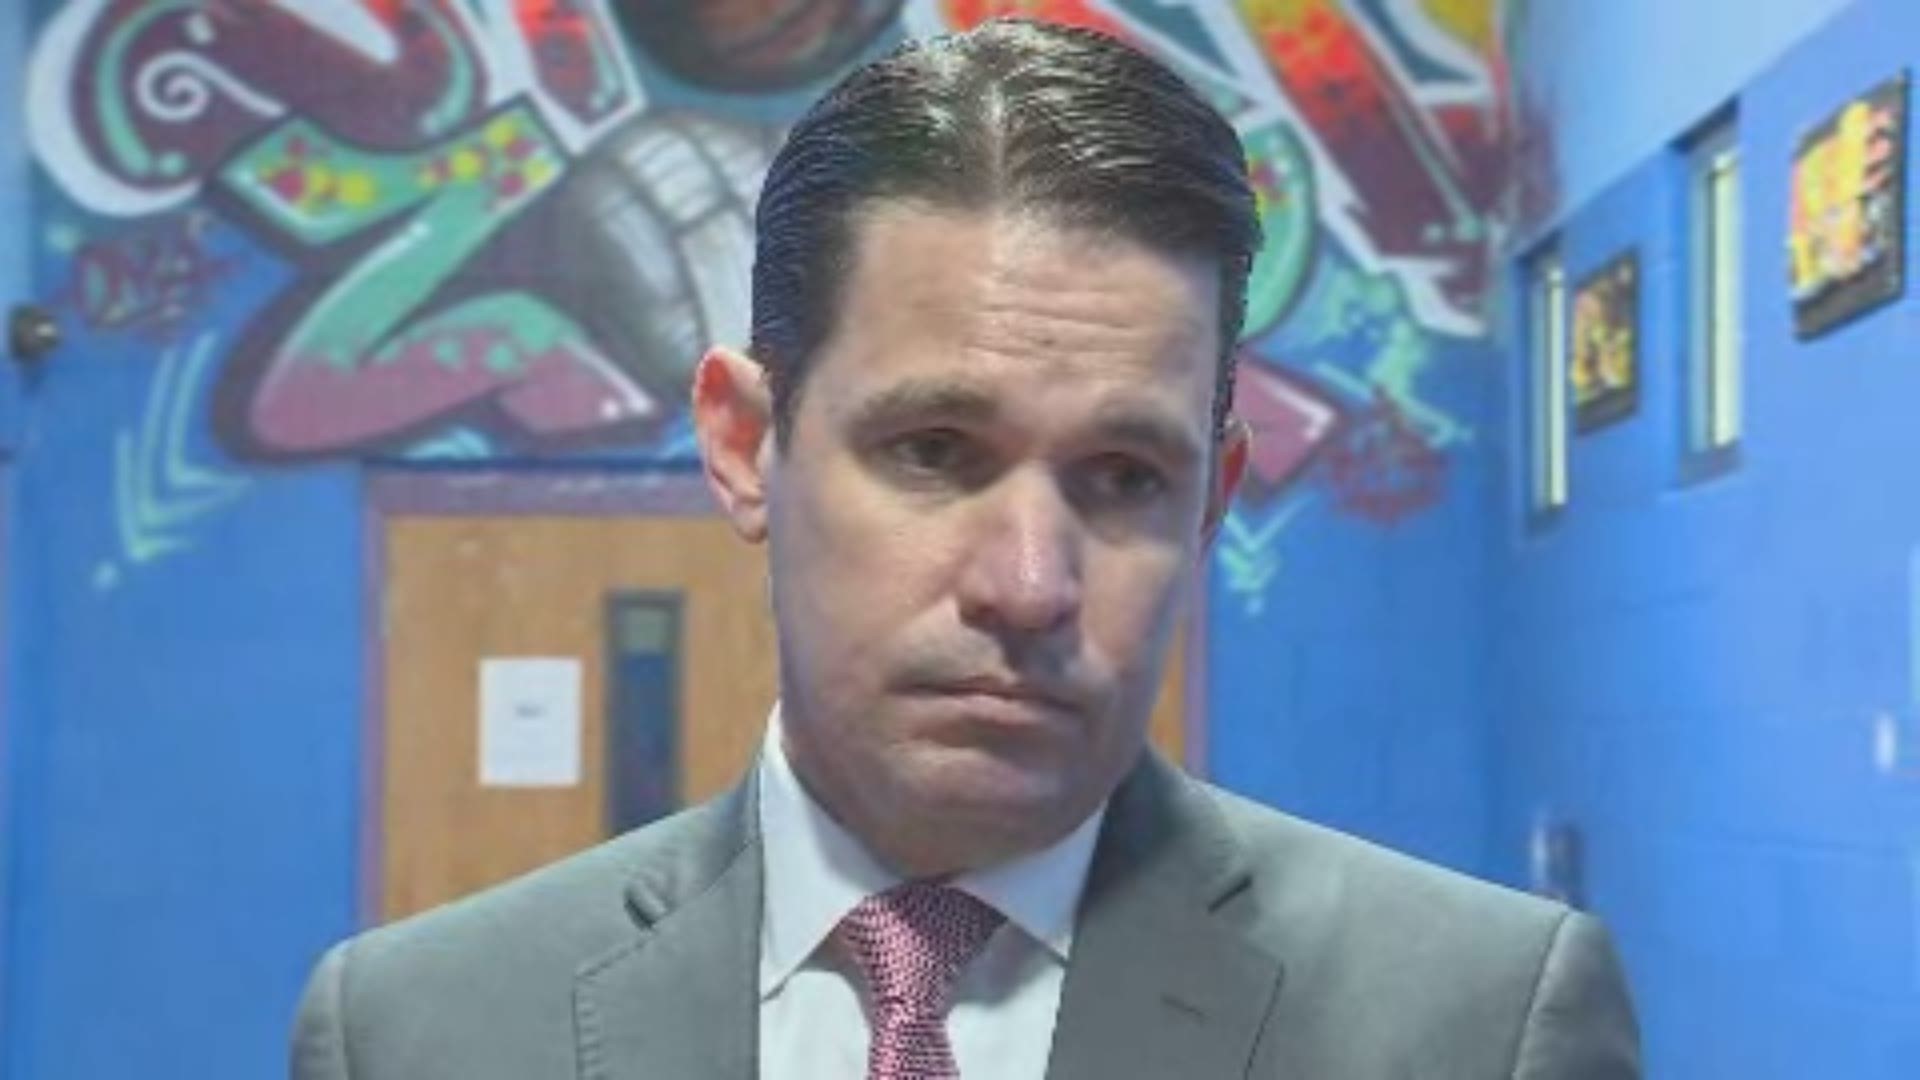 JCPS Superintendent Marty Pollio talked about the teacher sick-out on March 12. He said he is concerned about the services and educational instruction the students don't get when a school day does not take place.